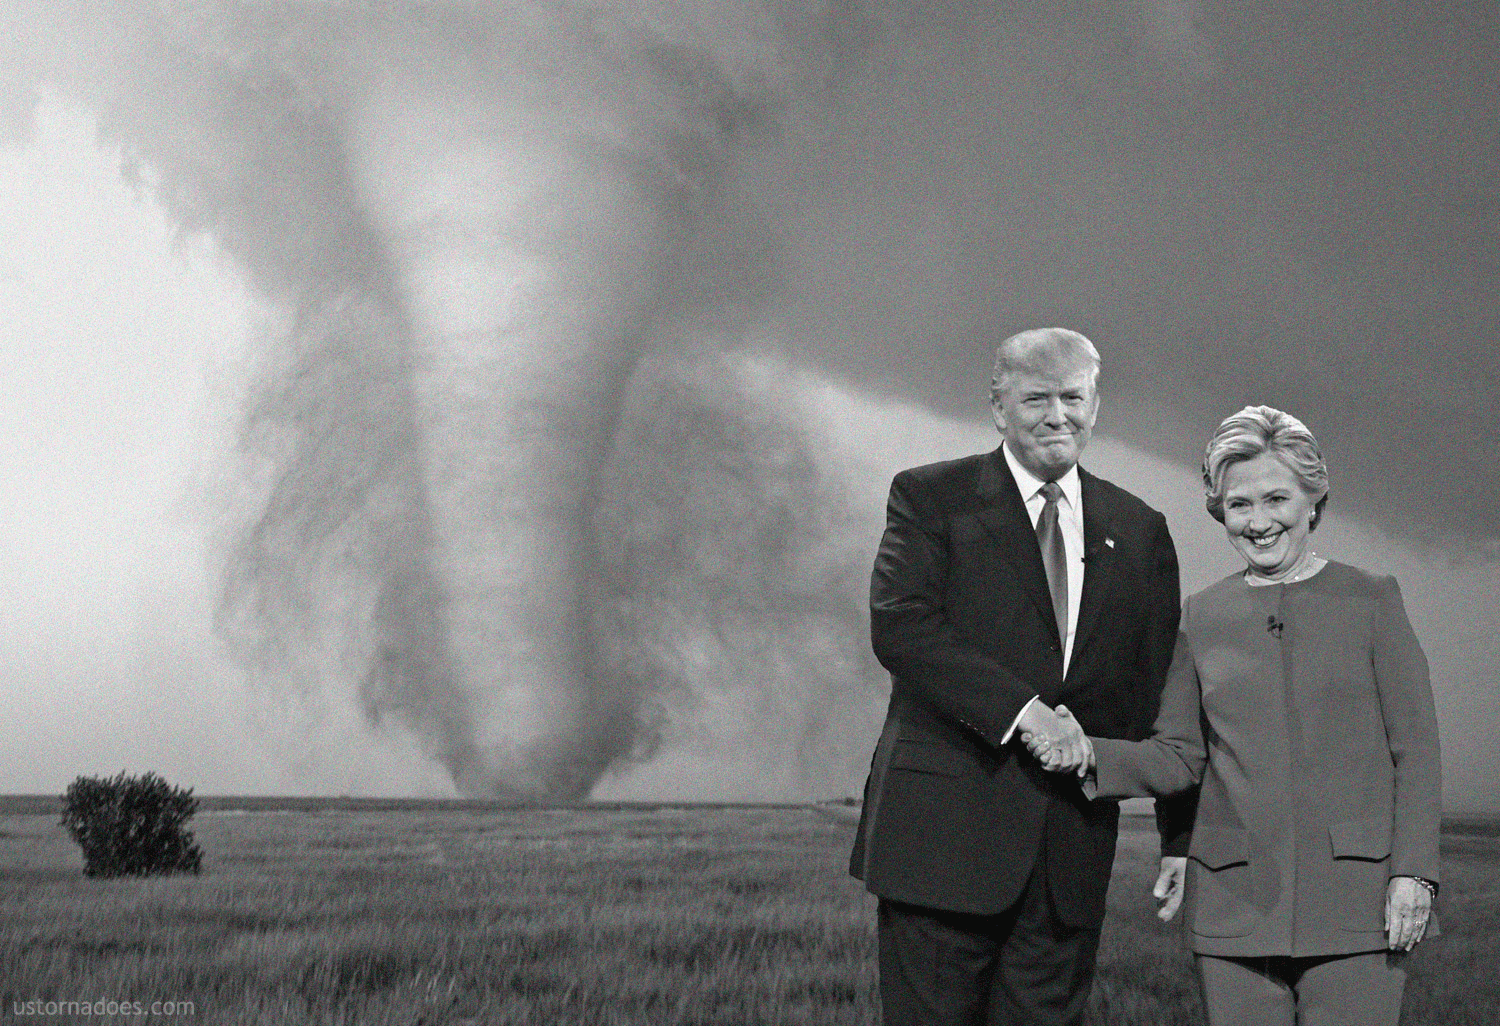 Tornadoes have scoured the landscape on Election Day before